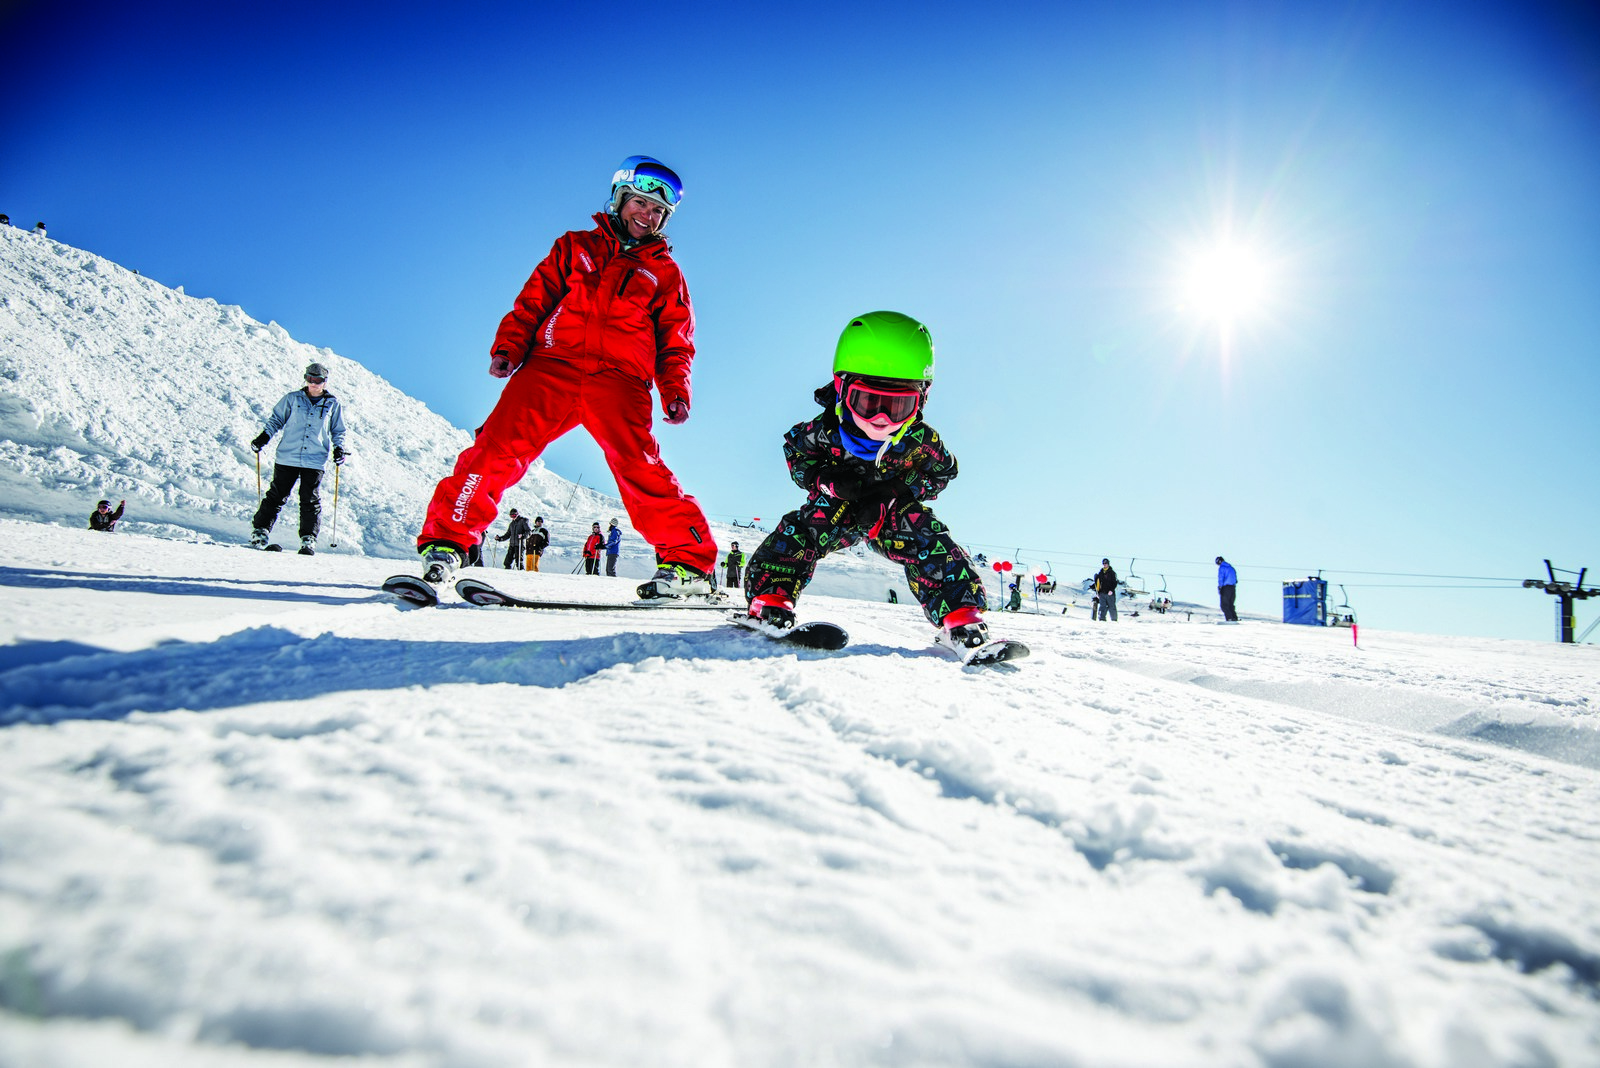 Child learners to ski with instructor at Cardrona Alpine Resort